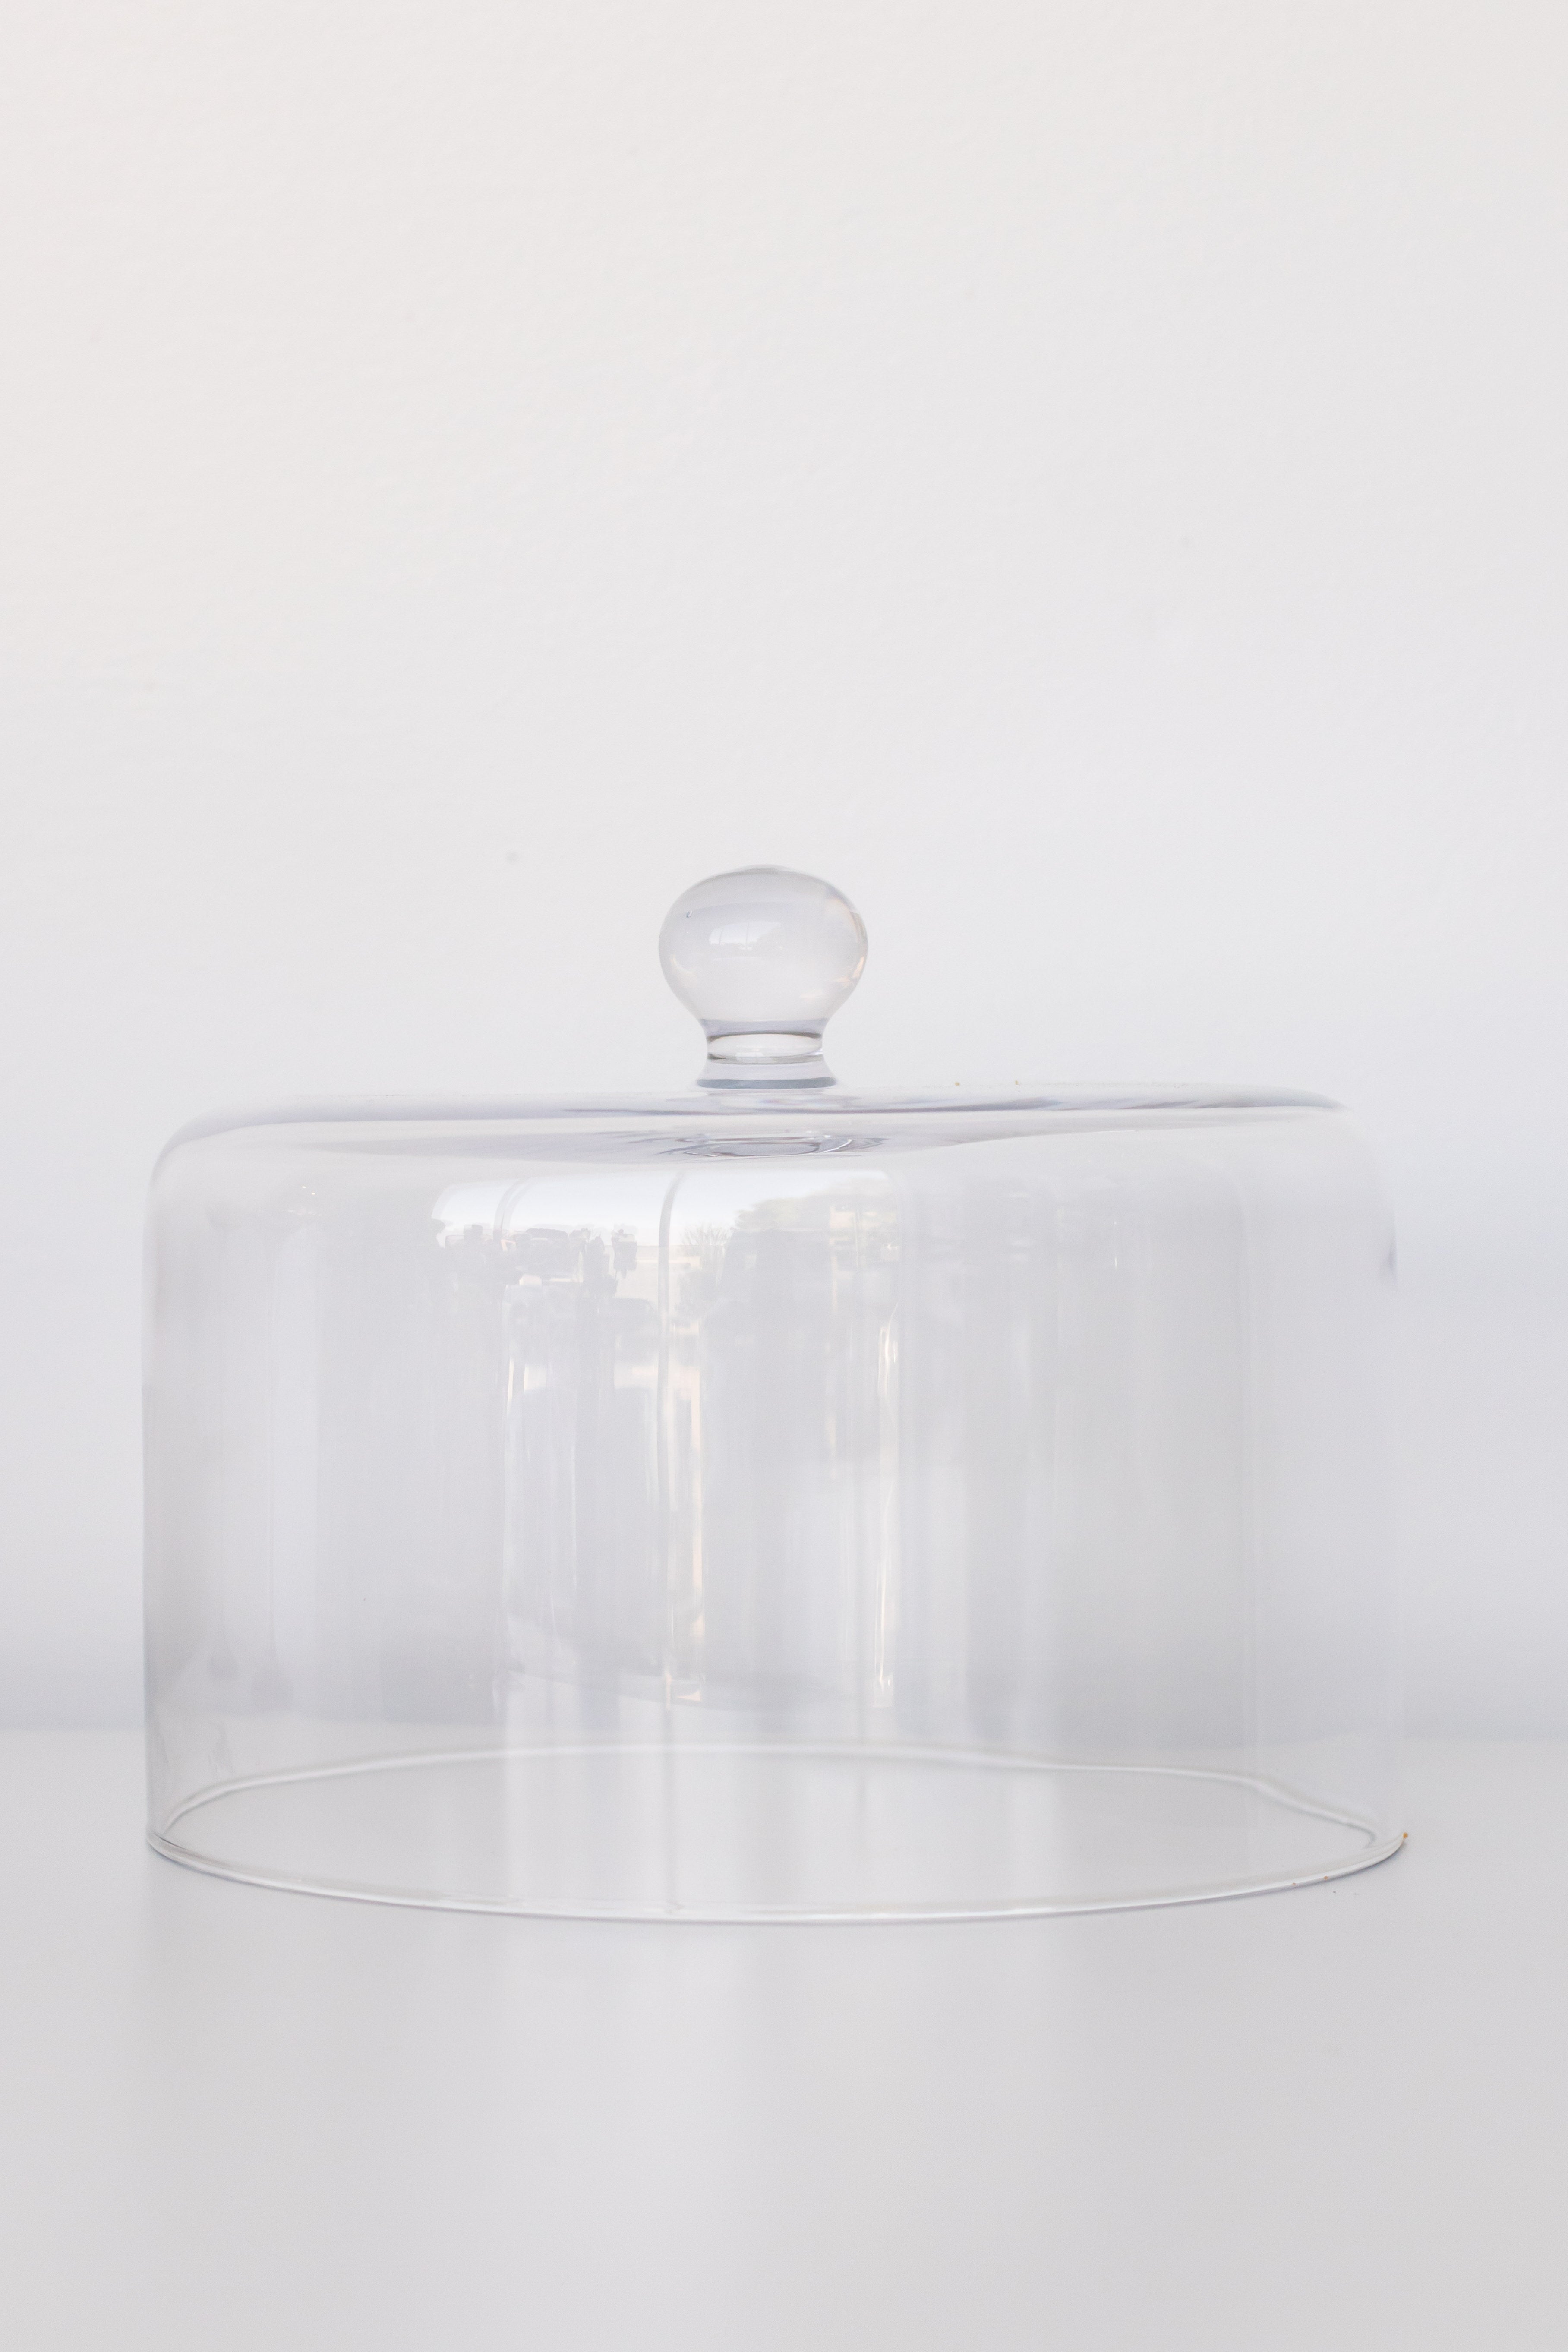 2Pcs Pasabahce Glass Cake Stand With Dome Lid